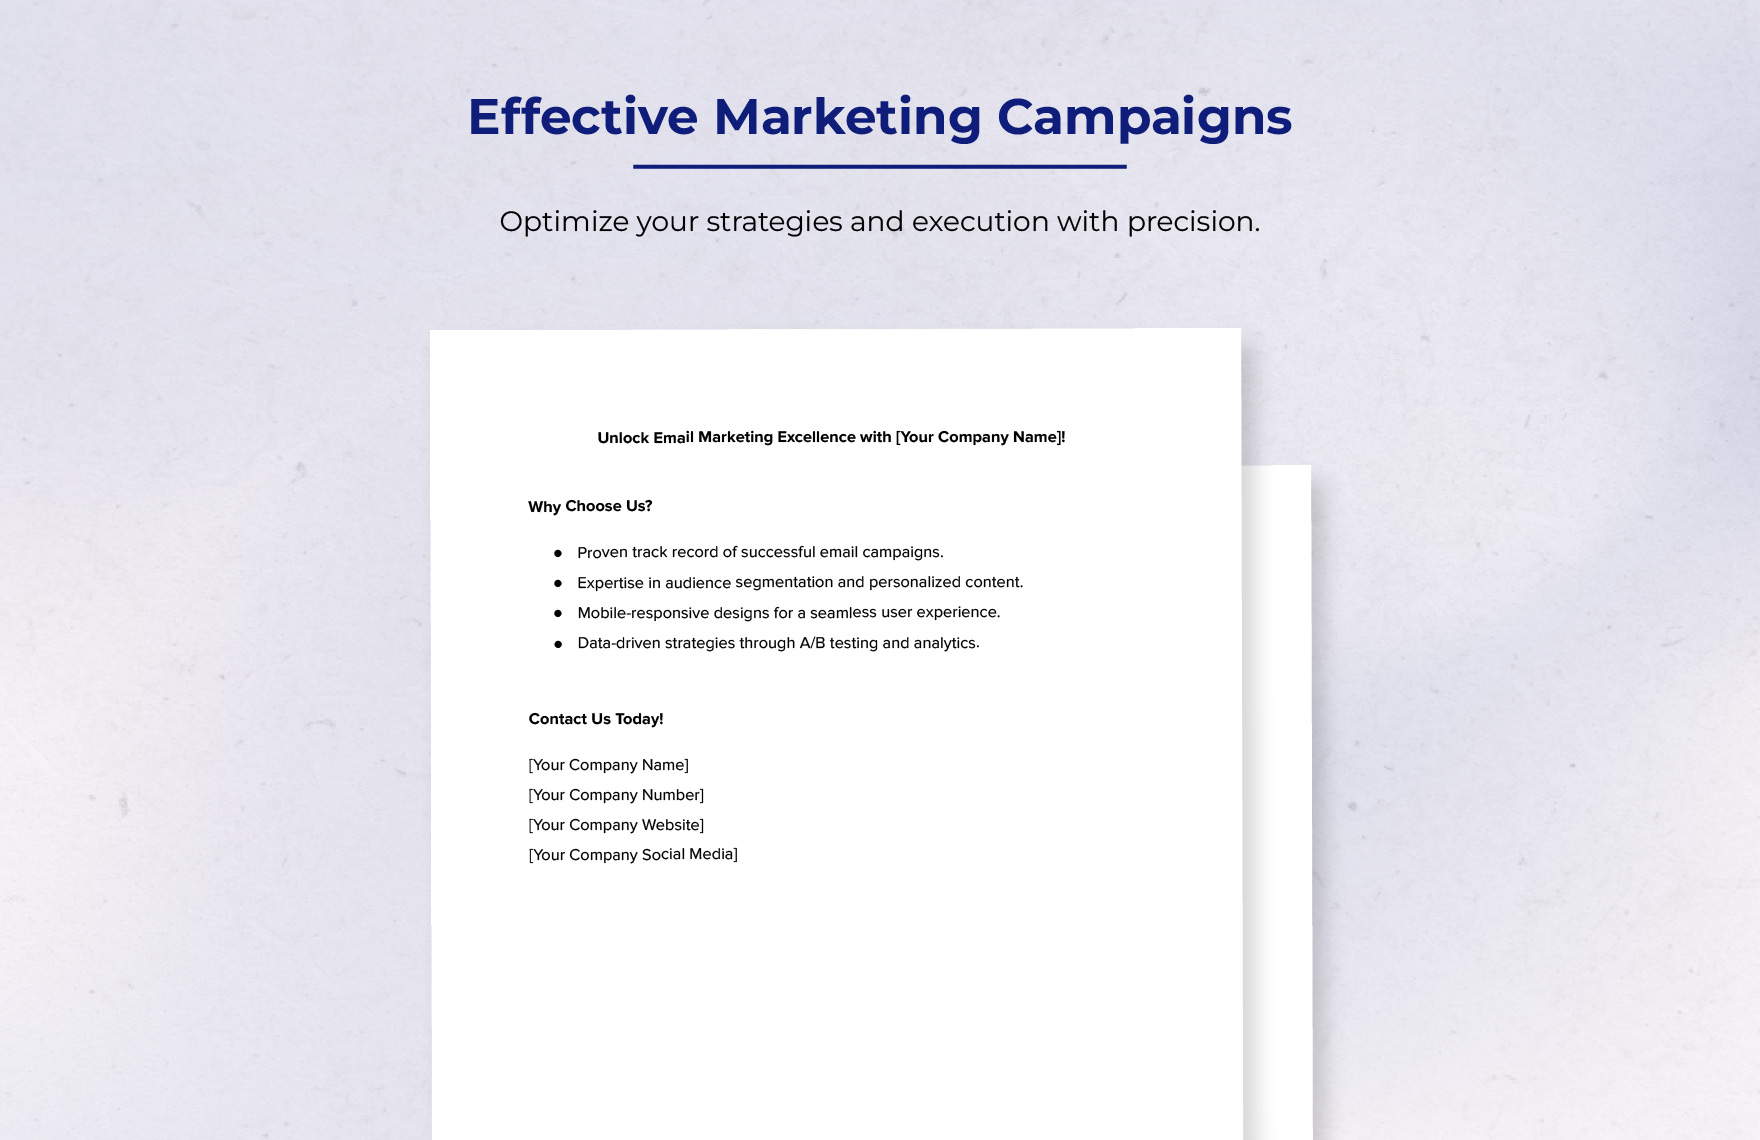 Email Marketing Pamphlet on Do's and Don'ts Template